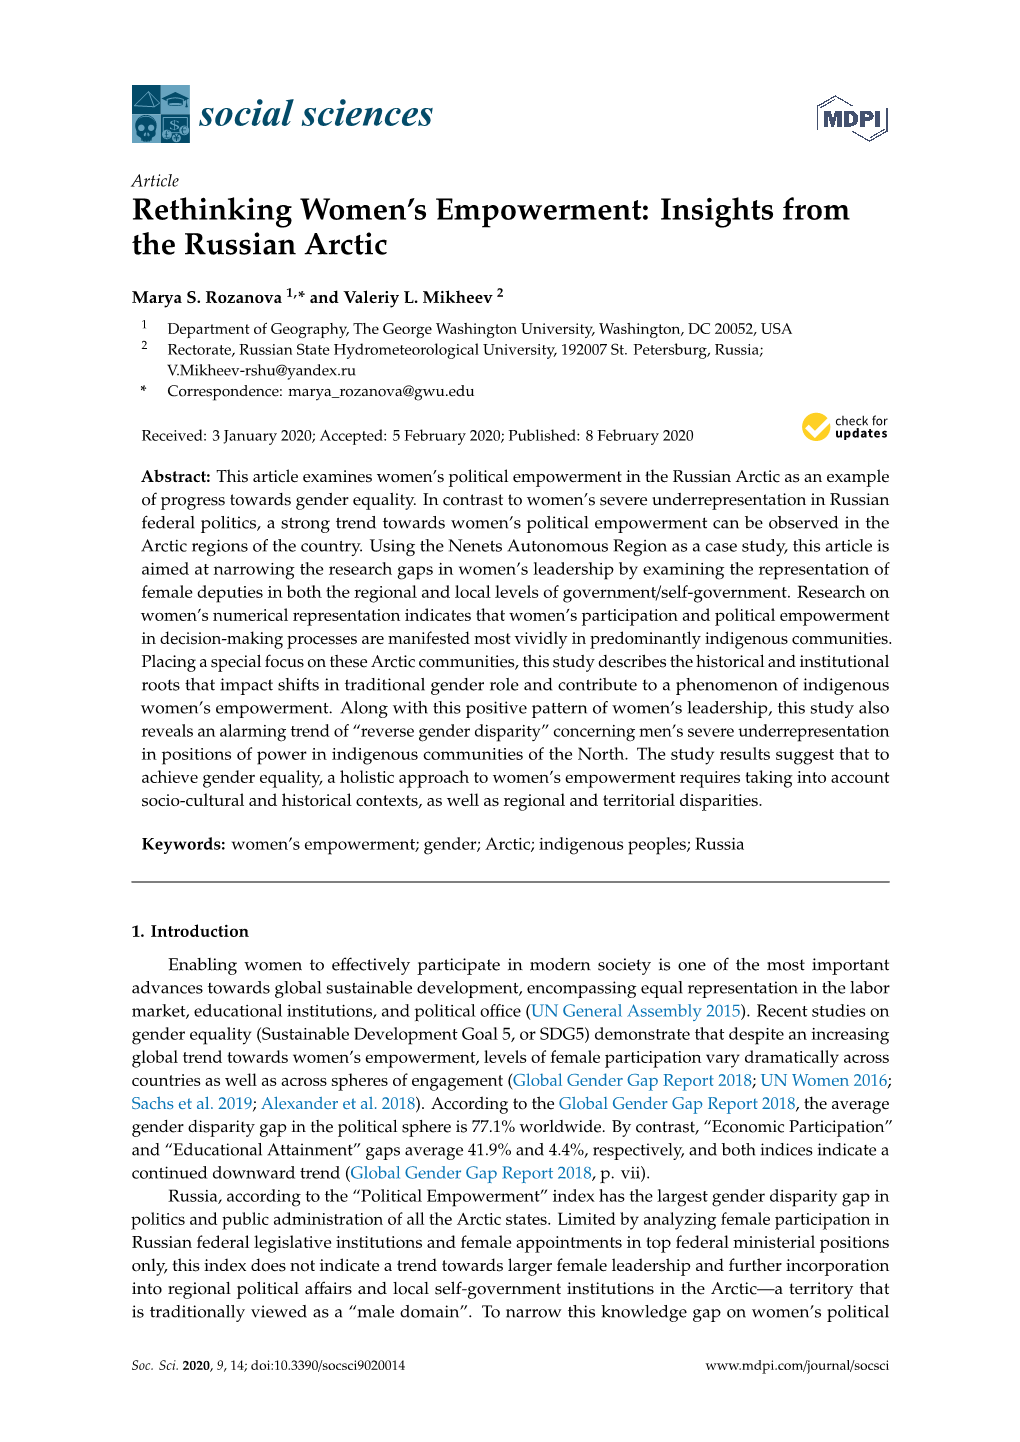 Rethinking Women's Empowerment: Insights from the Russian Arctic